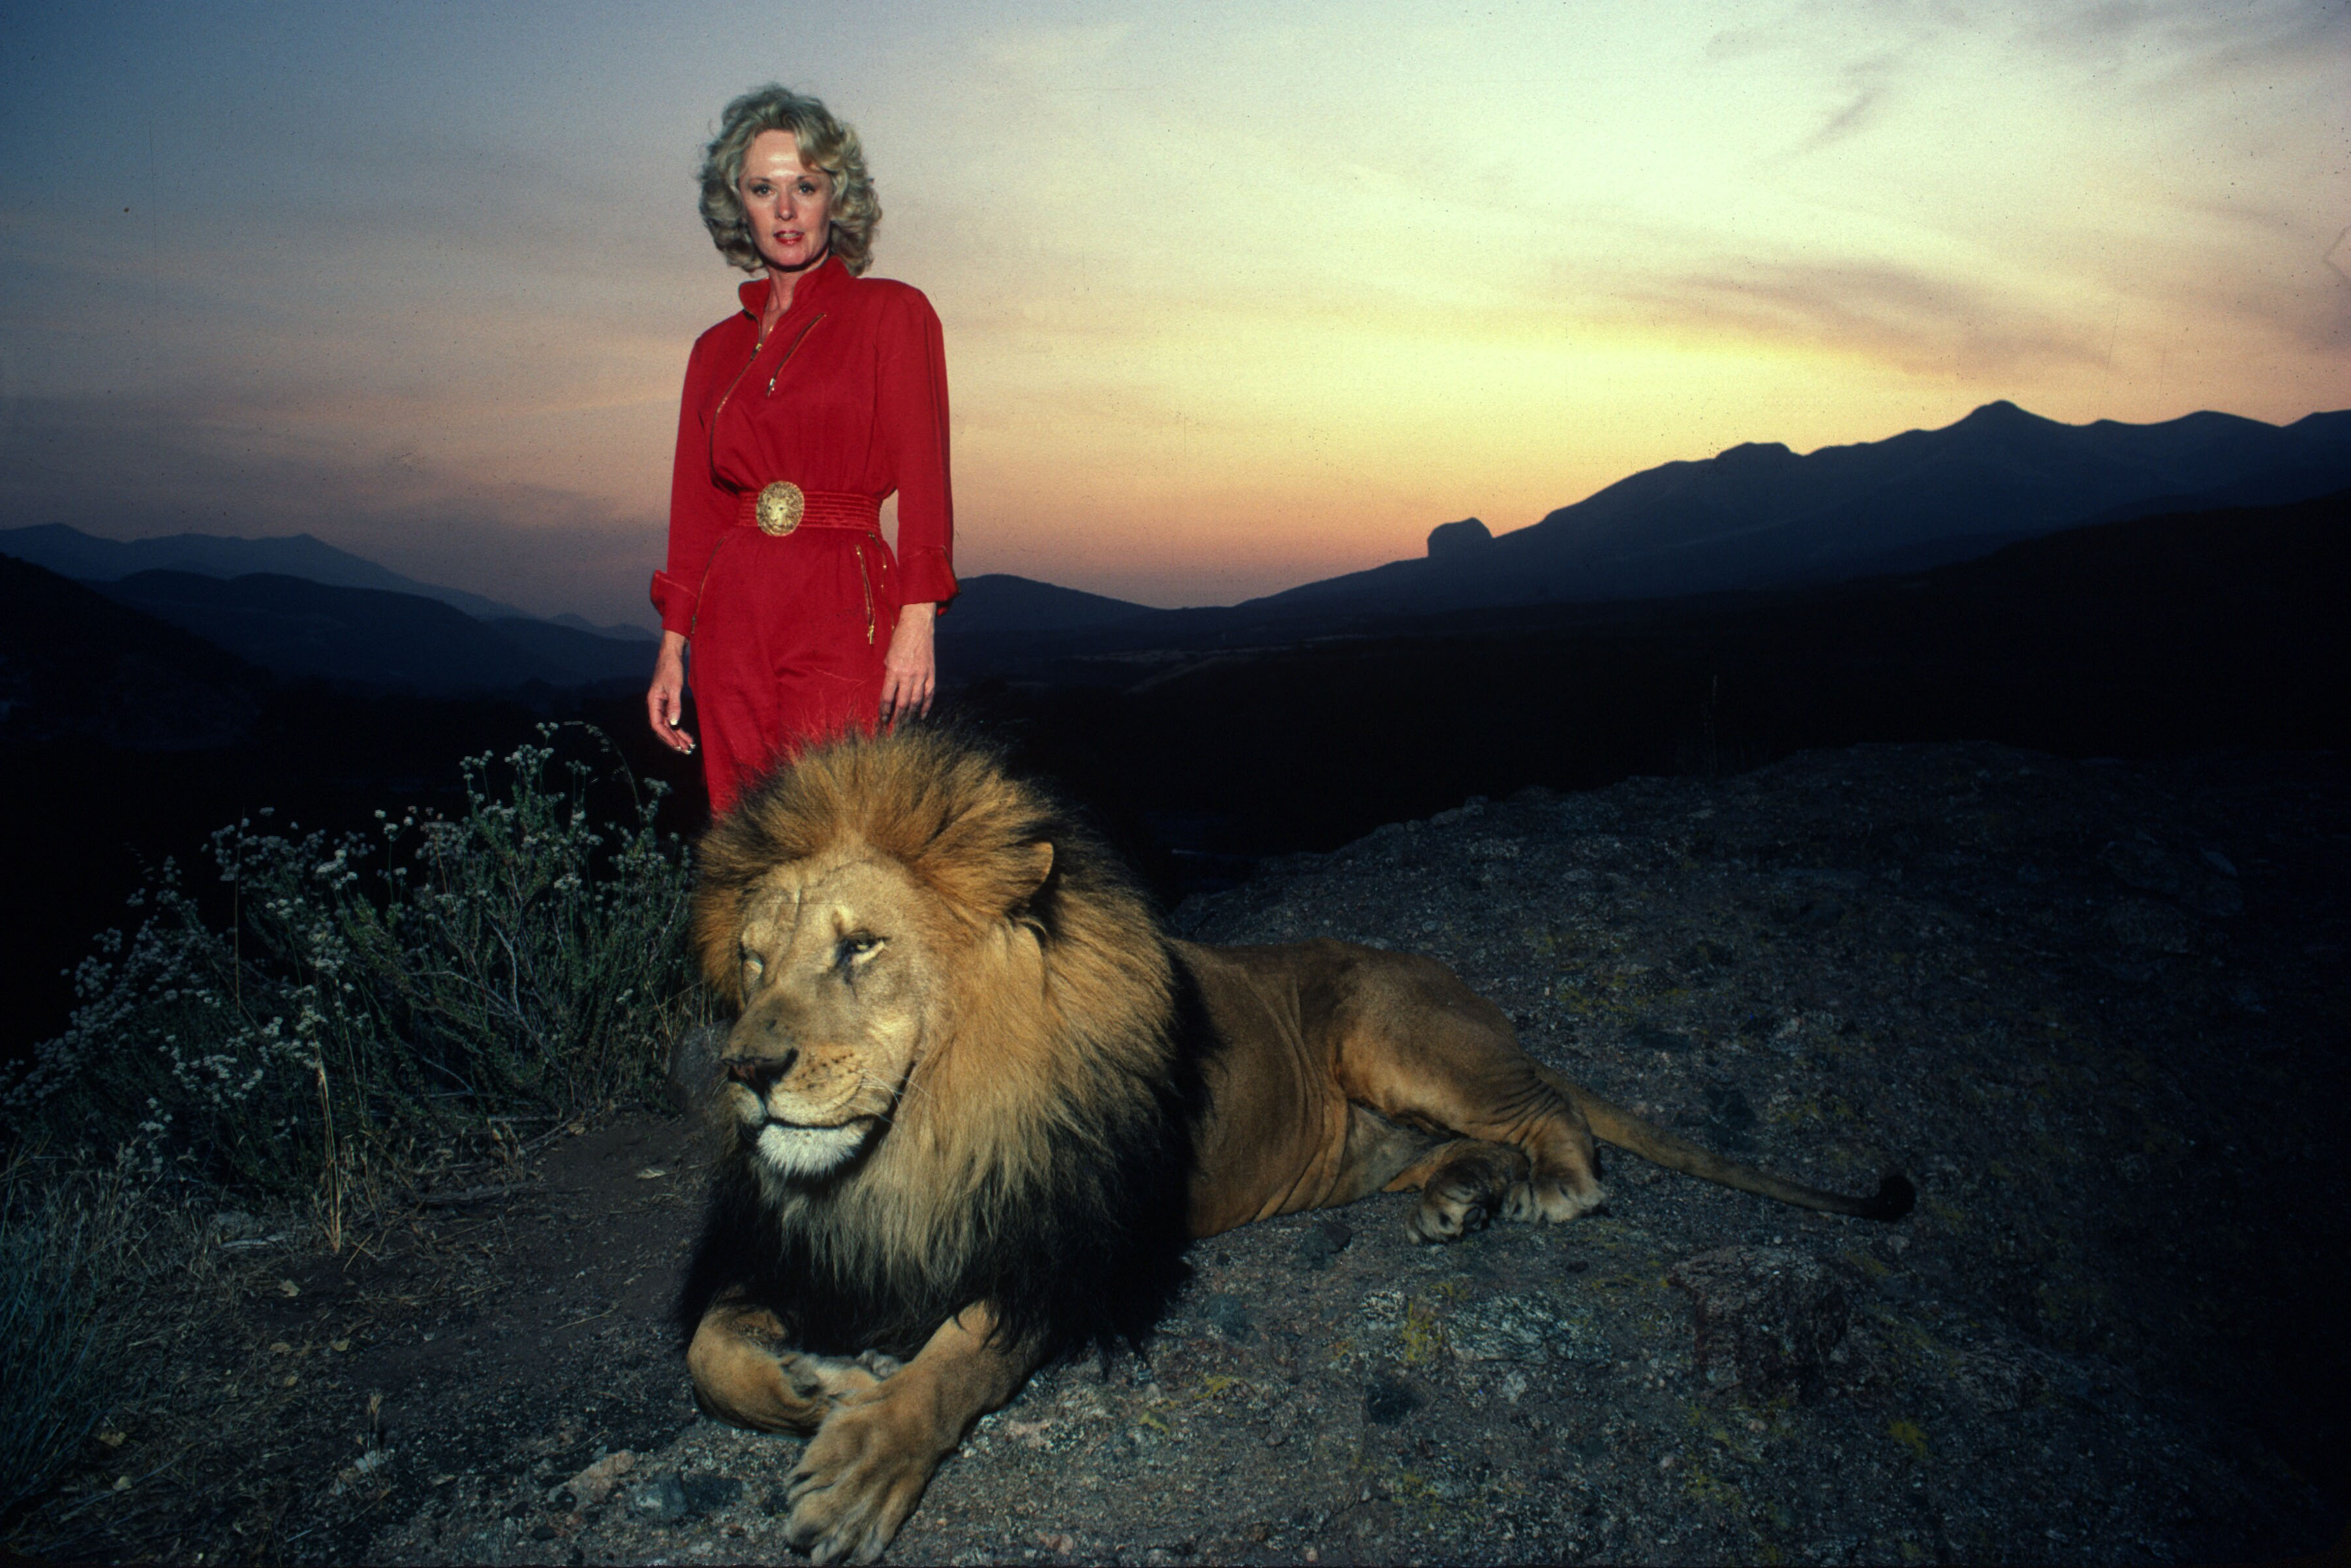 Tippi Hedren with a full grown male lion on a hill overlooking her Saugus Animal reserve mountainside in Saugus, California, on November 16, 1983. | Source: Getty Images